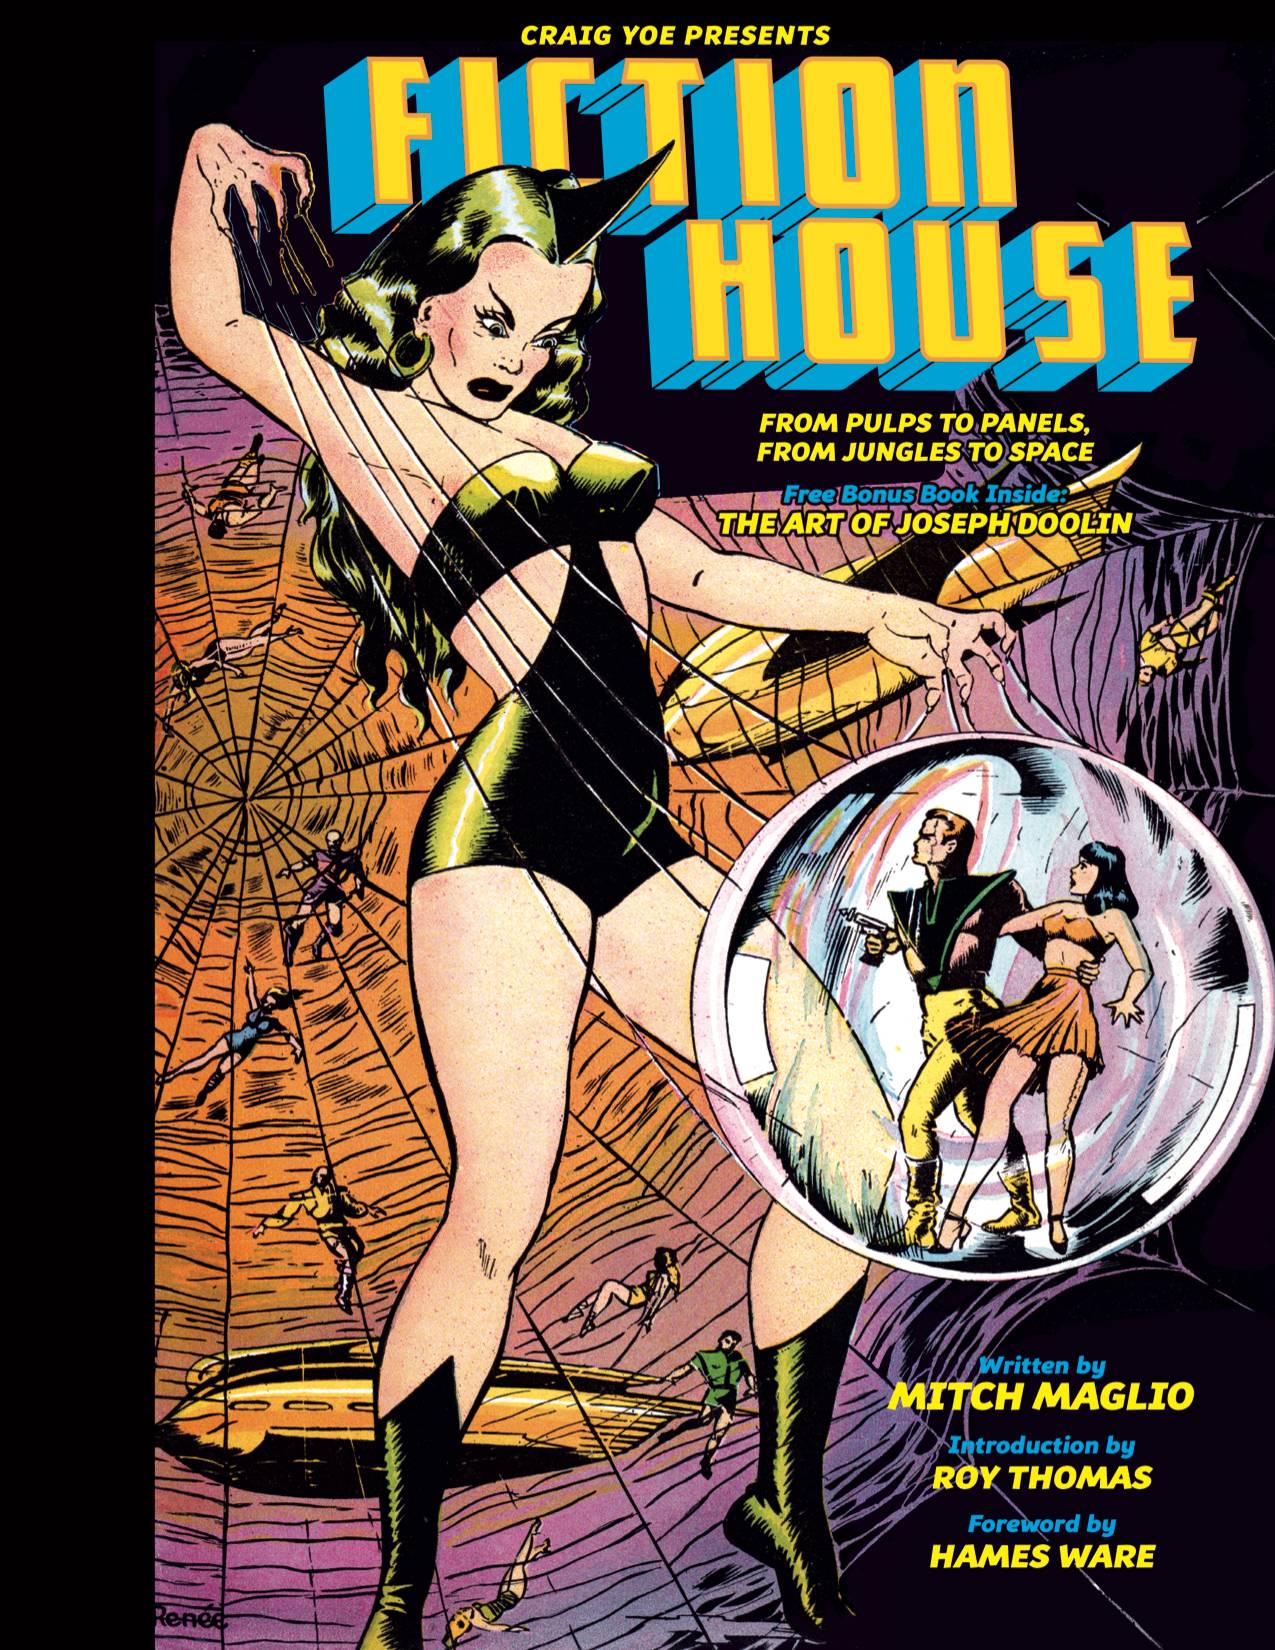 FICTION HOUSE FROM PULPS TO PANELS HC